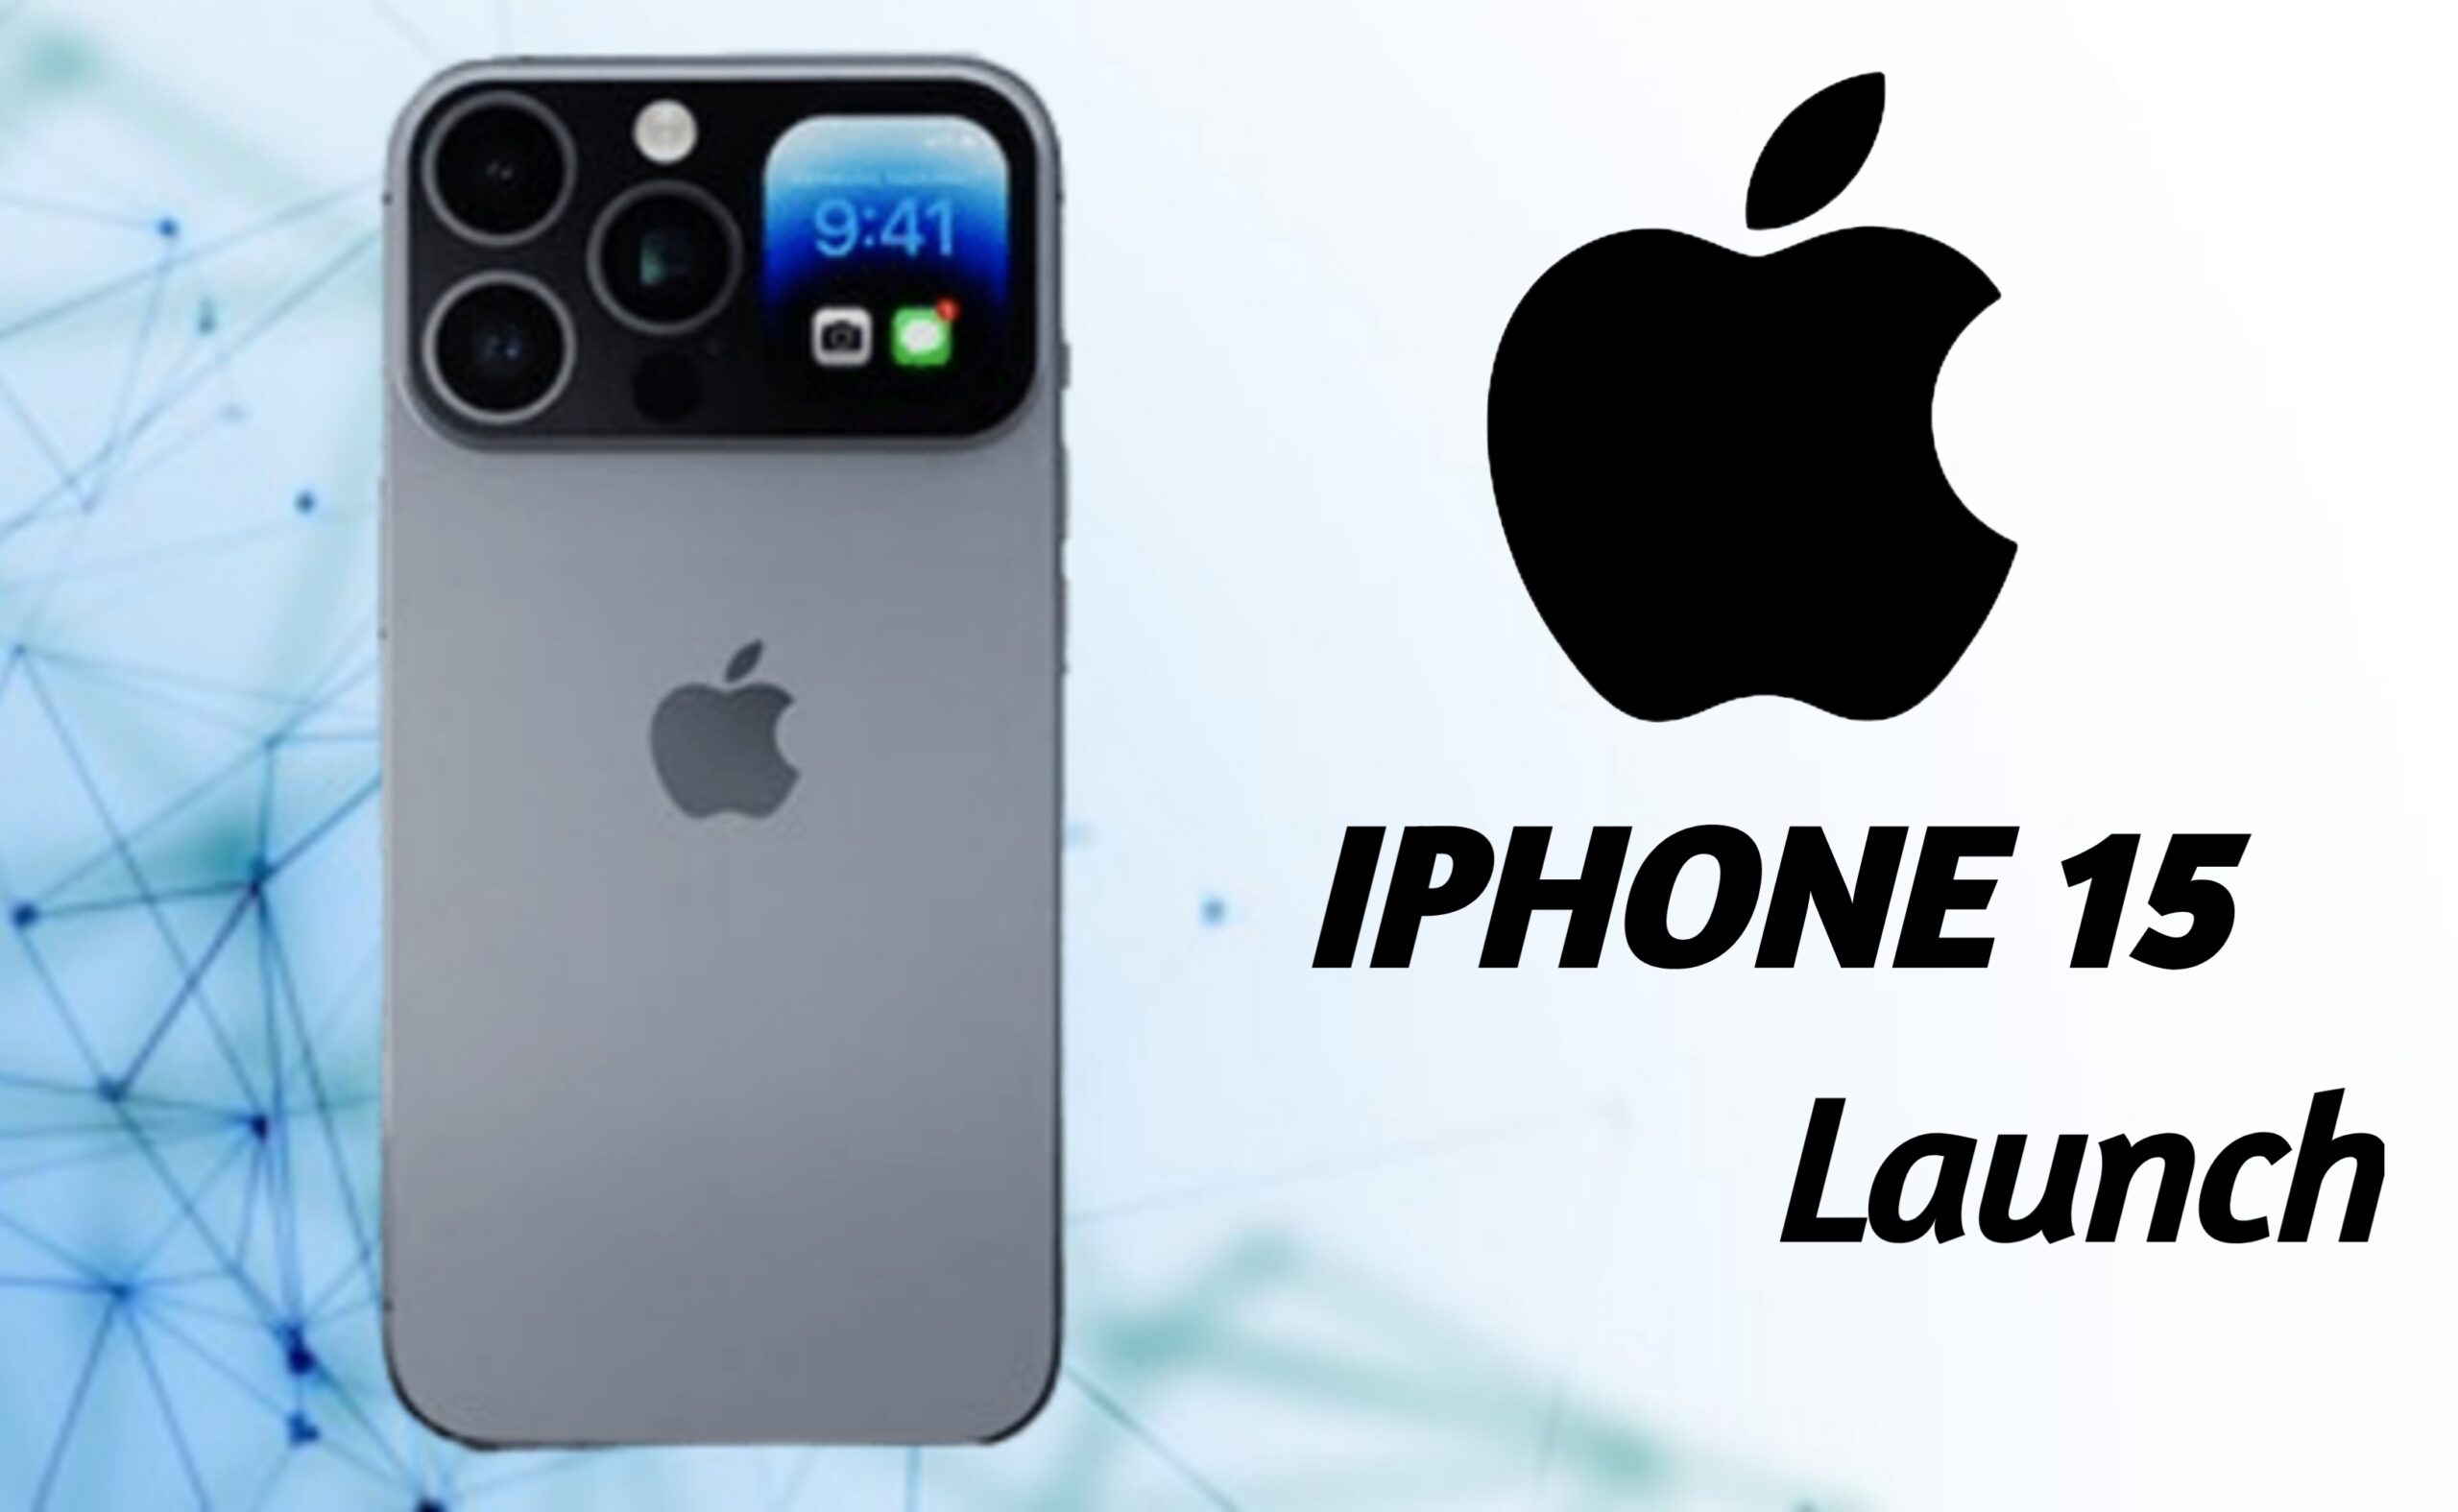 Iphone 15 Launch, Full Specification & Designs Details, Release Date